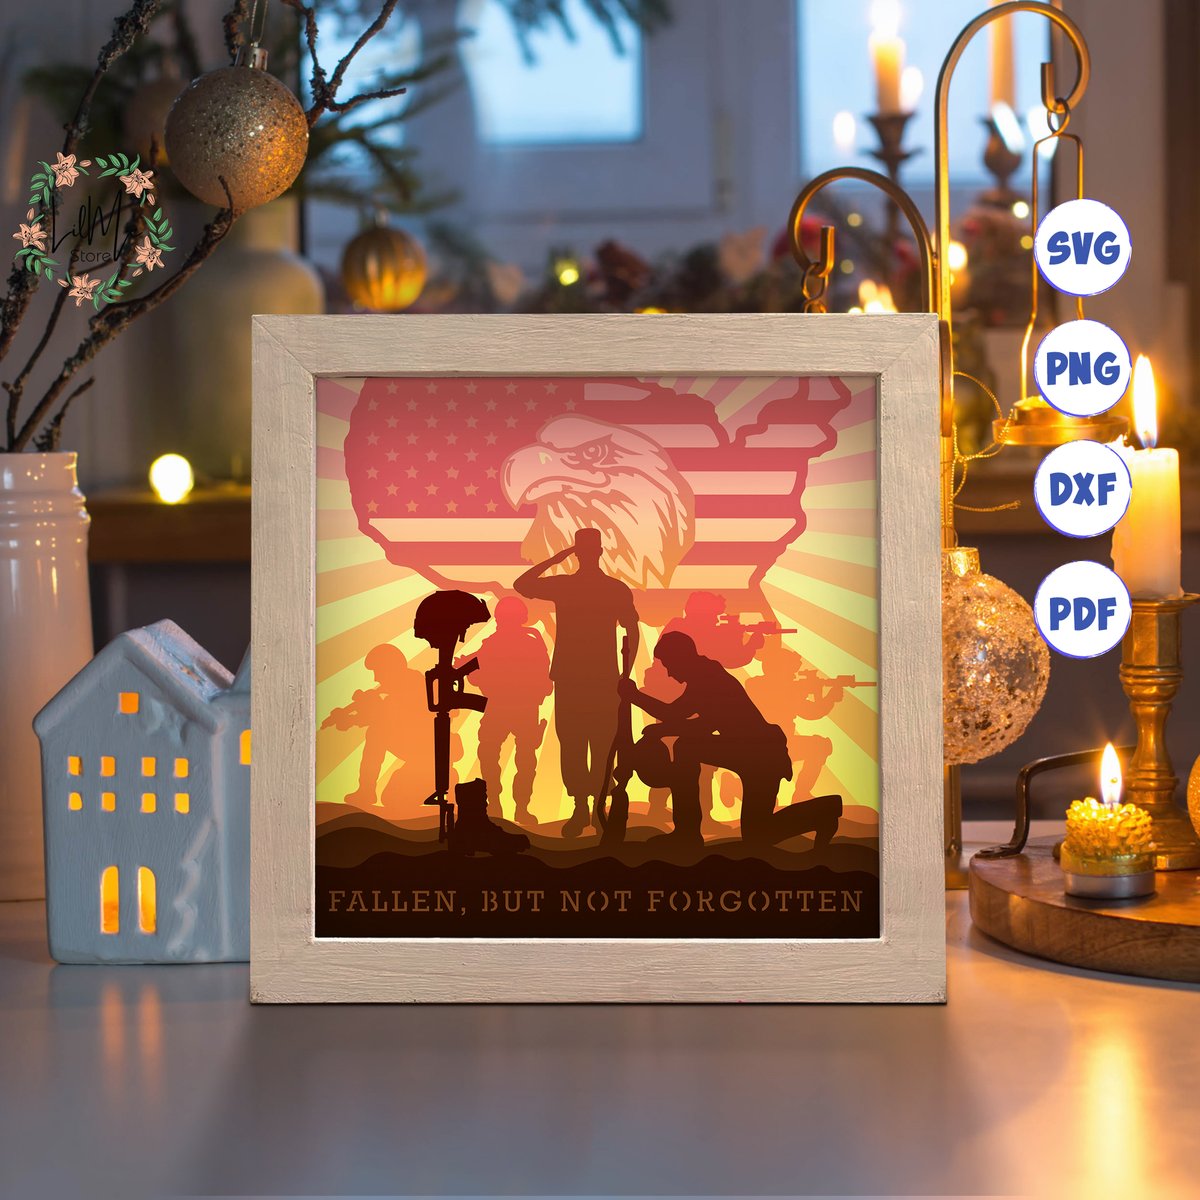 Excited to share the latest addition to my #etsy shop: Fallen Soldiers Paper Cut Light Box Template, 3D Shadow Box SVG Files, Shadow Box Paper Cut, Light Box SVG, 3D Papercut Light Box SVG File etsy.me/3PYby6K #independenceday #cardmakingstationery #3dsoldierssvg #soldier